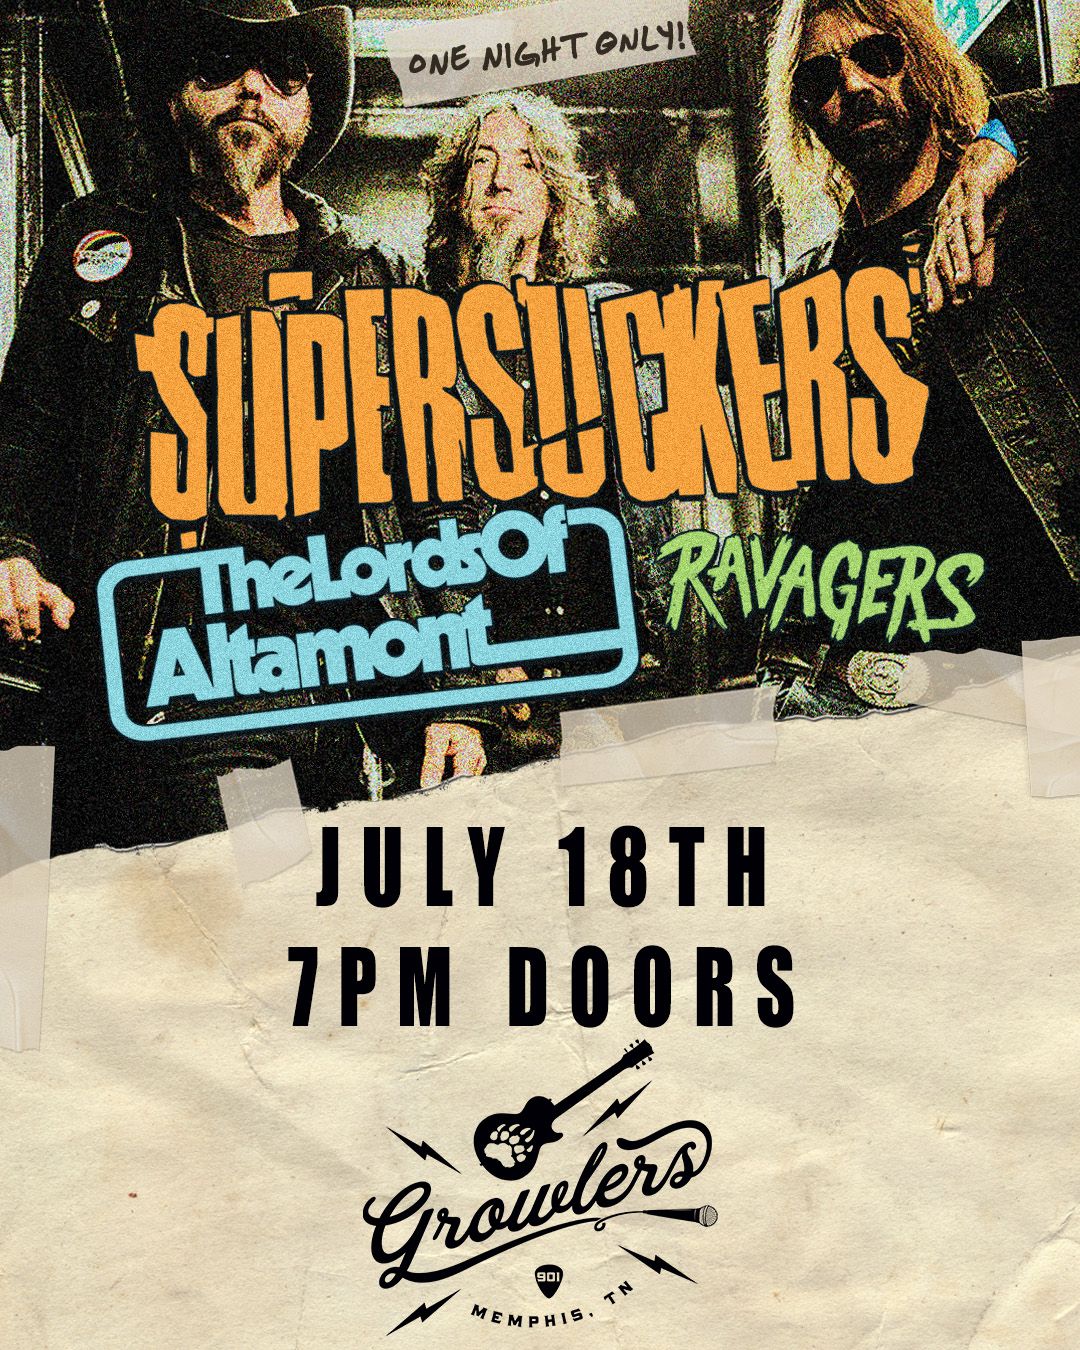 Supersuckers w\/ The Lords of Altamont, Ravagers at Growlers